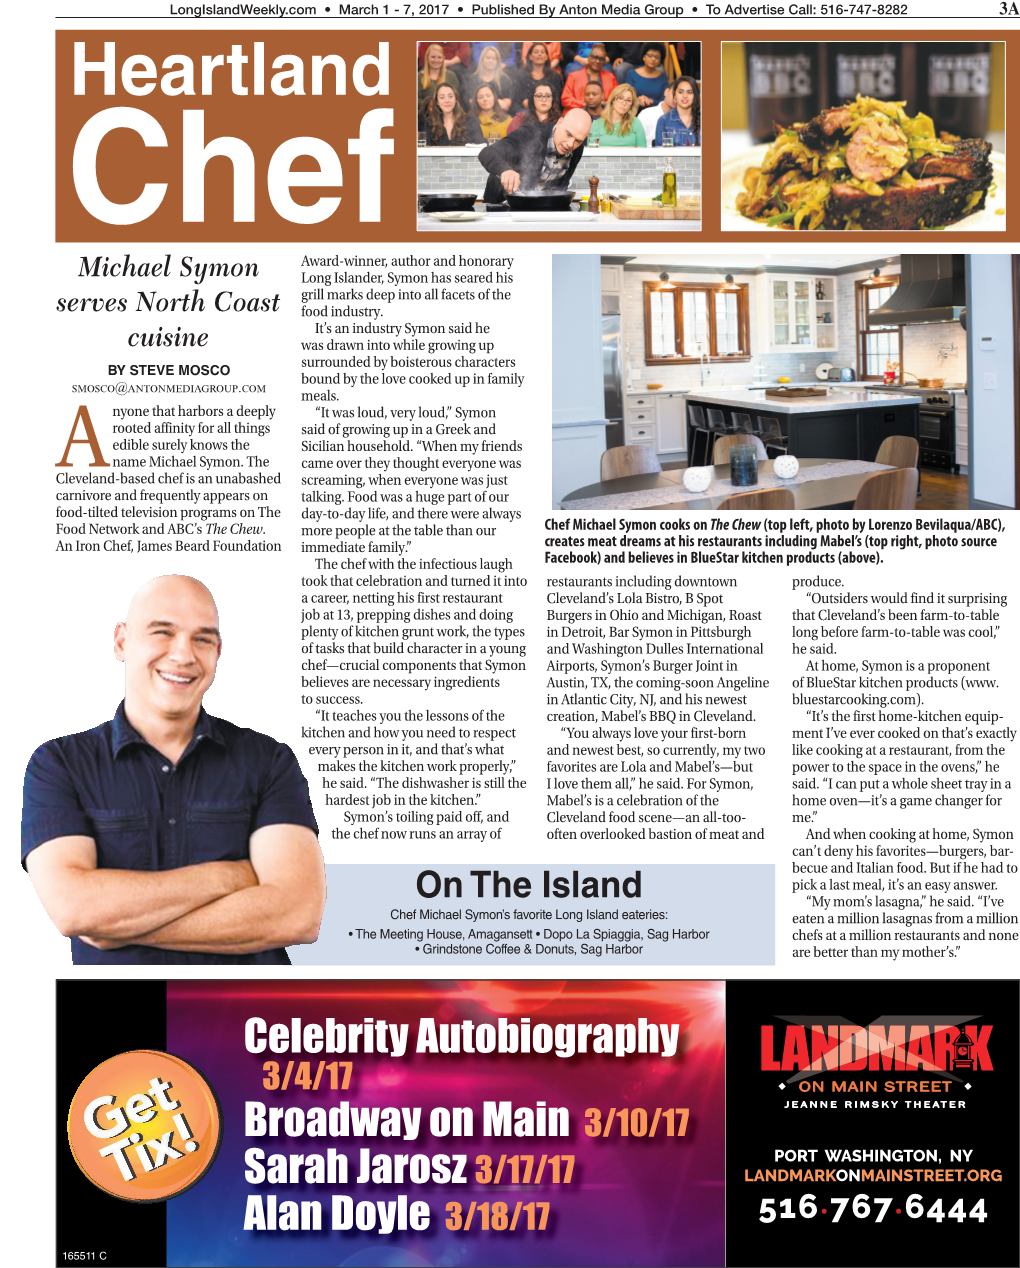 Feature Story in Long Island Weekly About Chef Michael Symon's